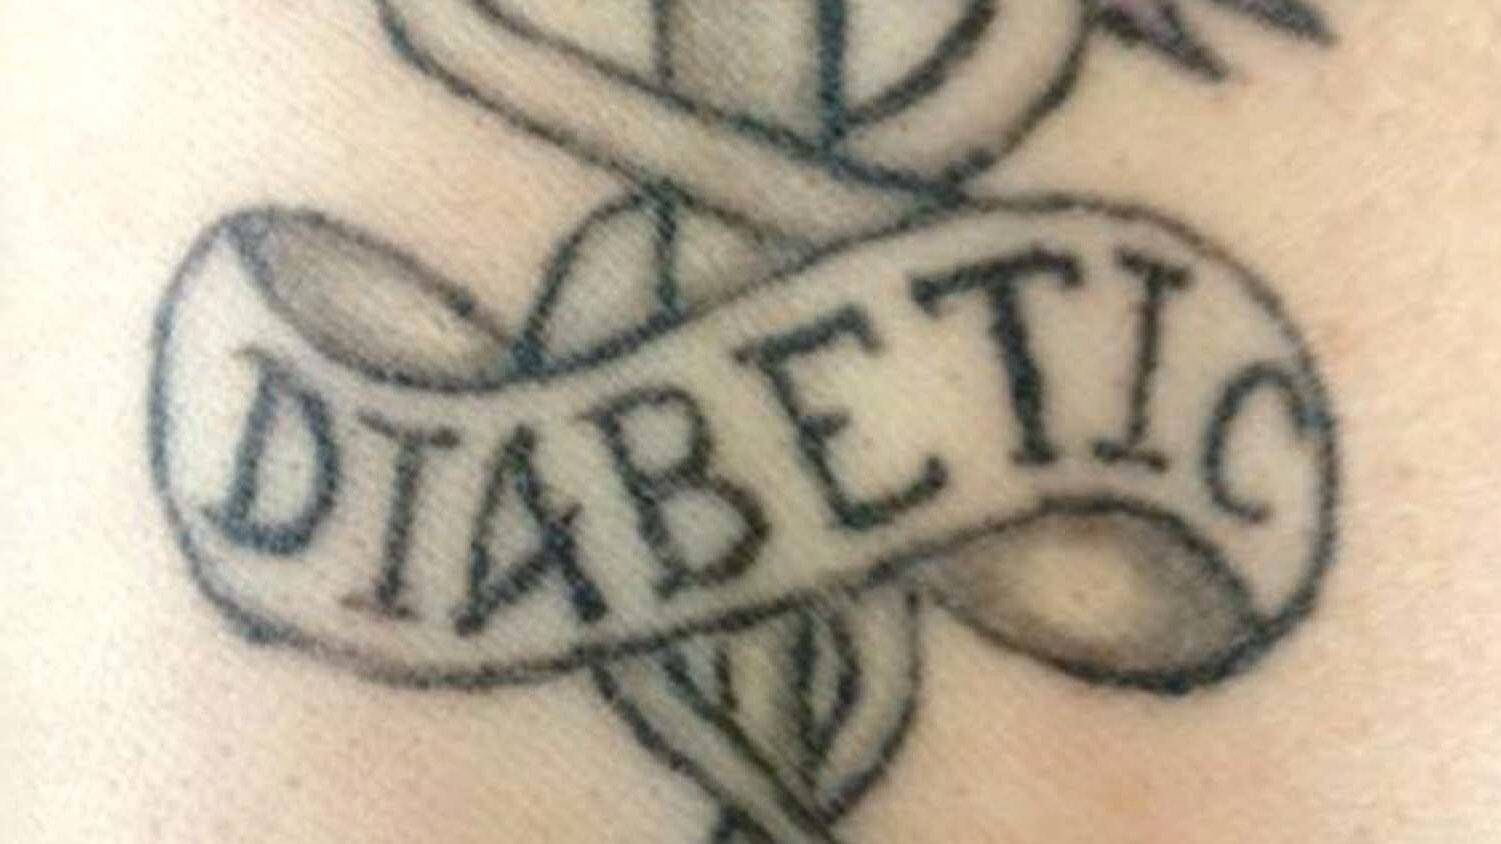 Medical information tattoos raise health-care questions - The Globe and Mail